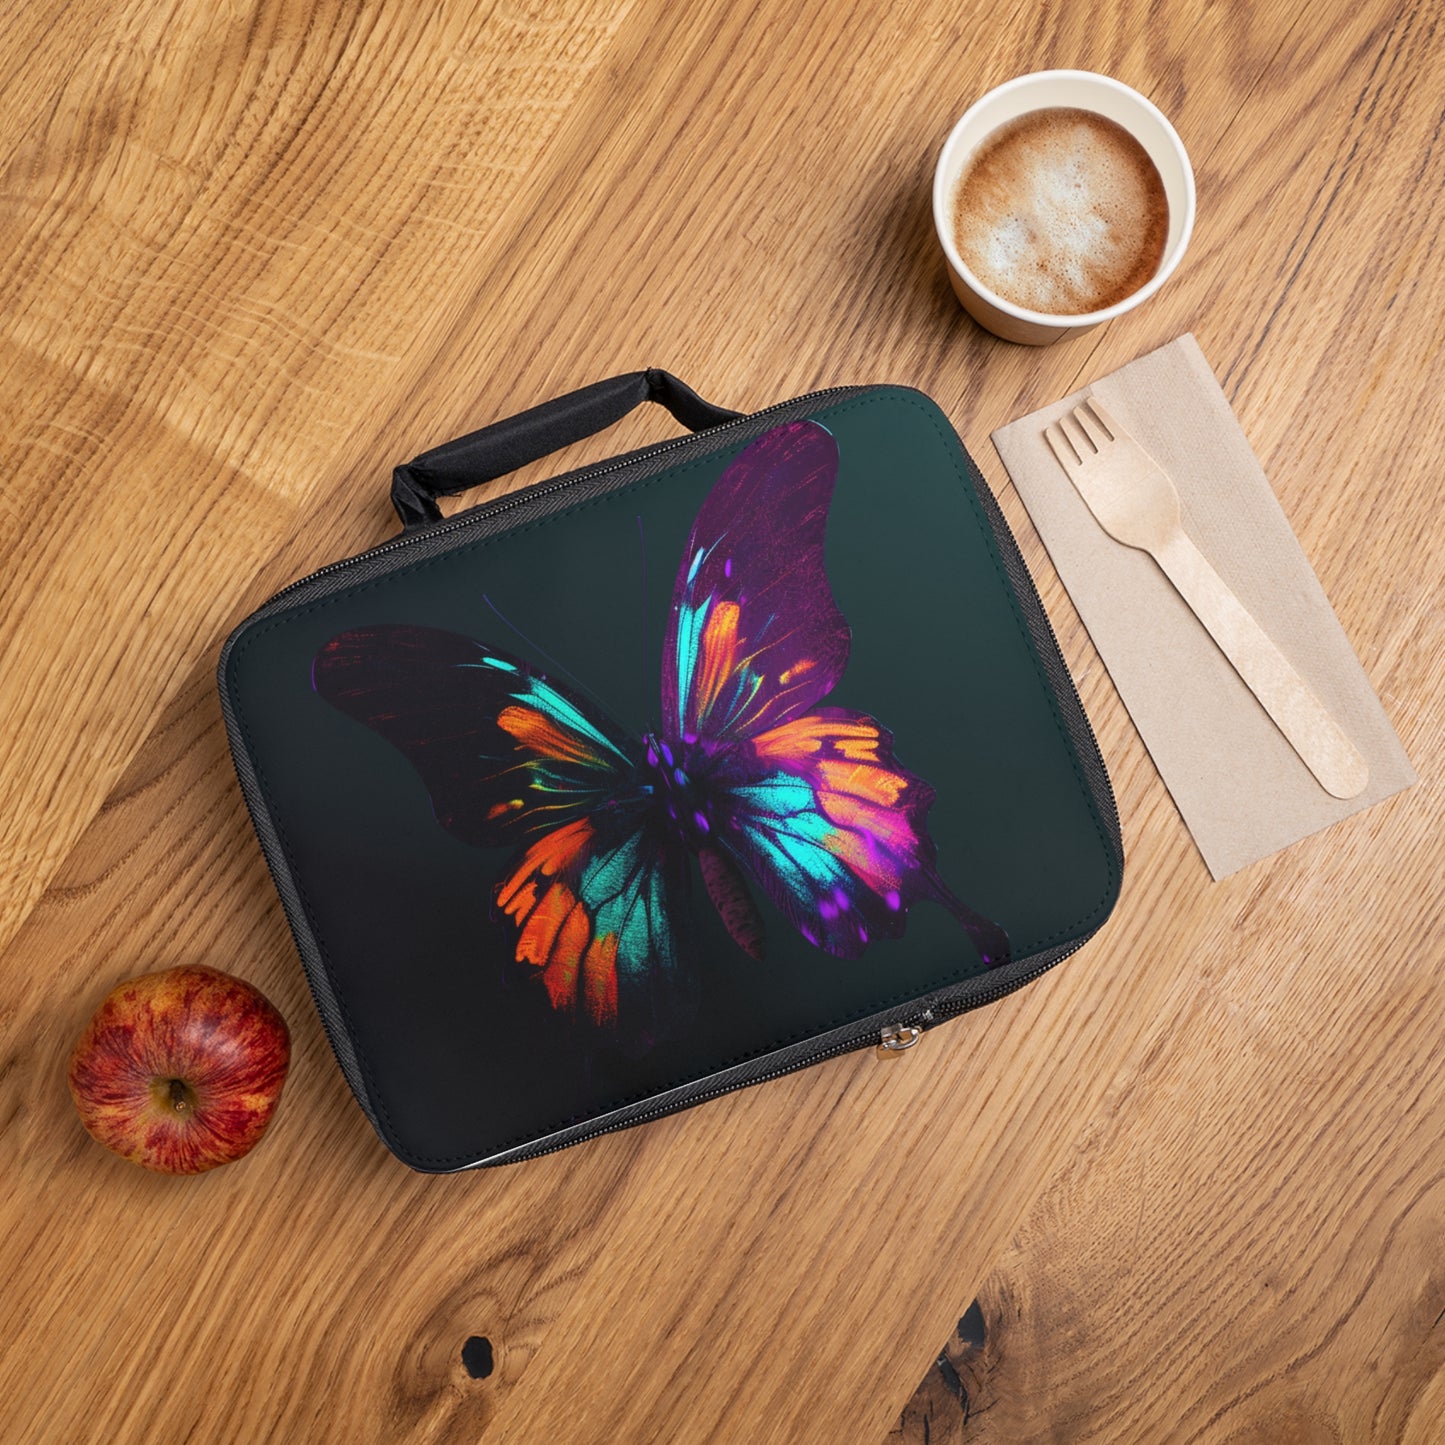 Lunch Bag Hyper Colorful Butterfly Purple 4